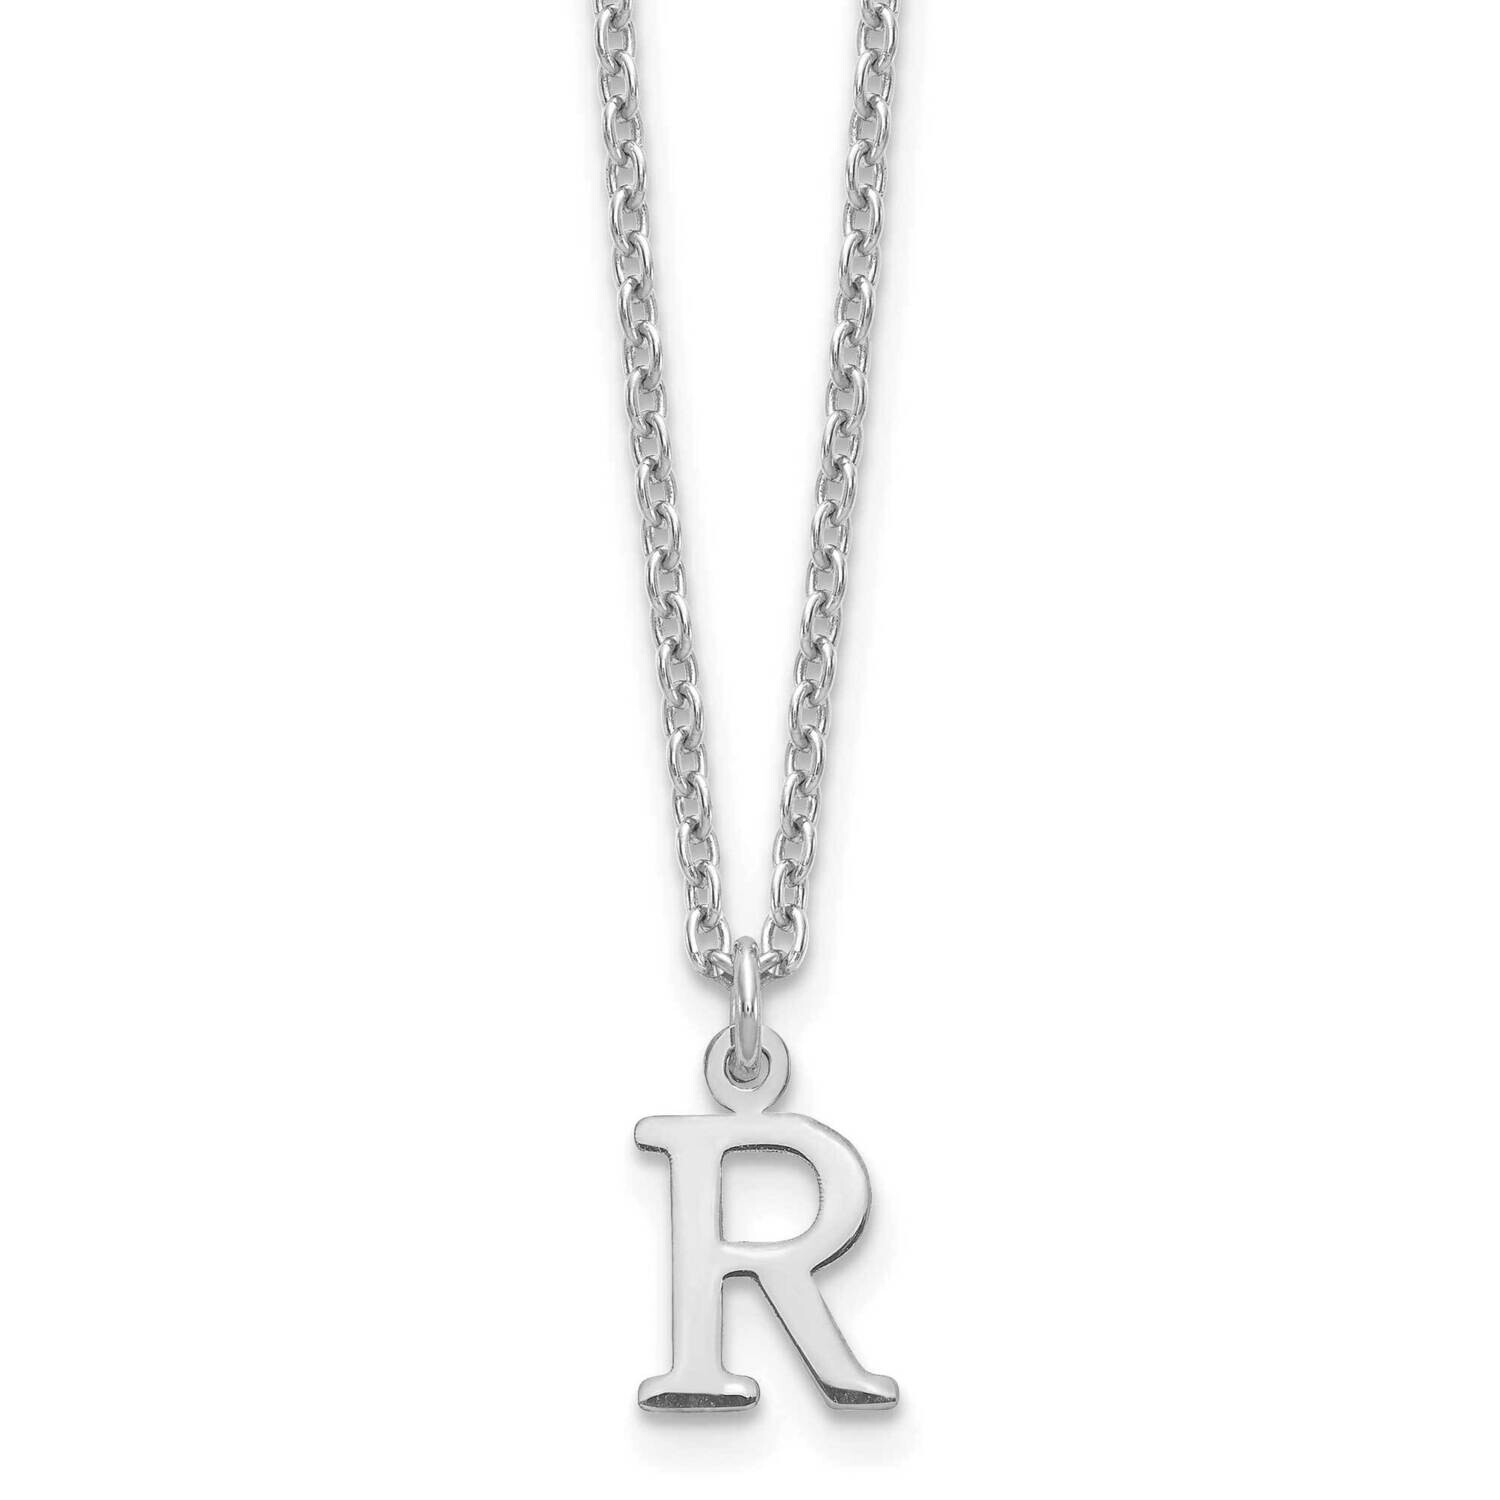 Cutout Letter R Initial Necklace Sterling Silver Rhodium-Plated XNA727SS/R